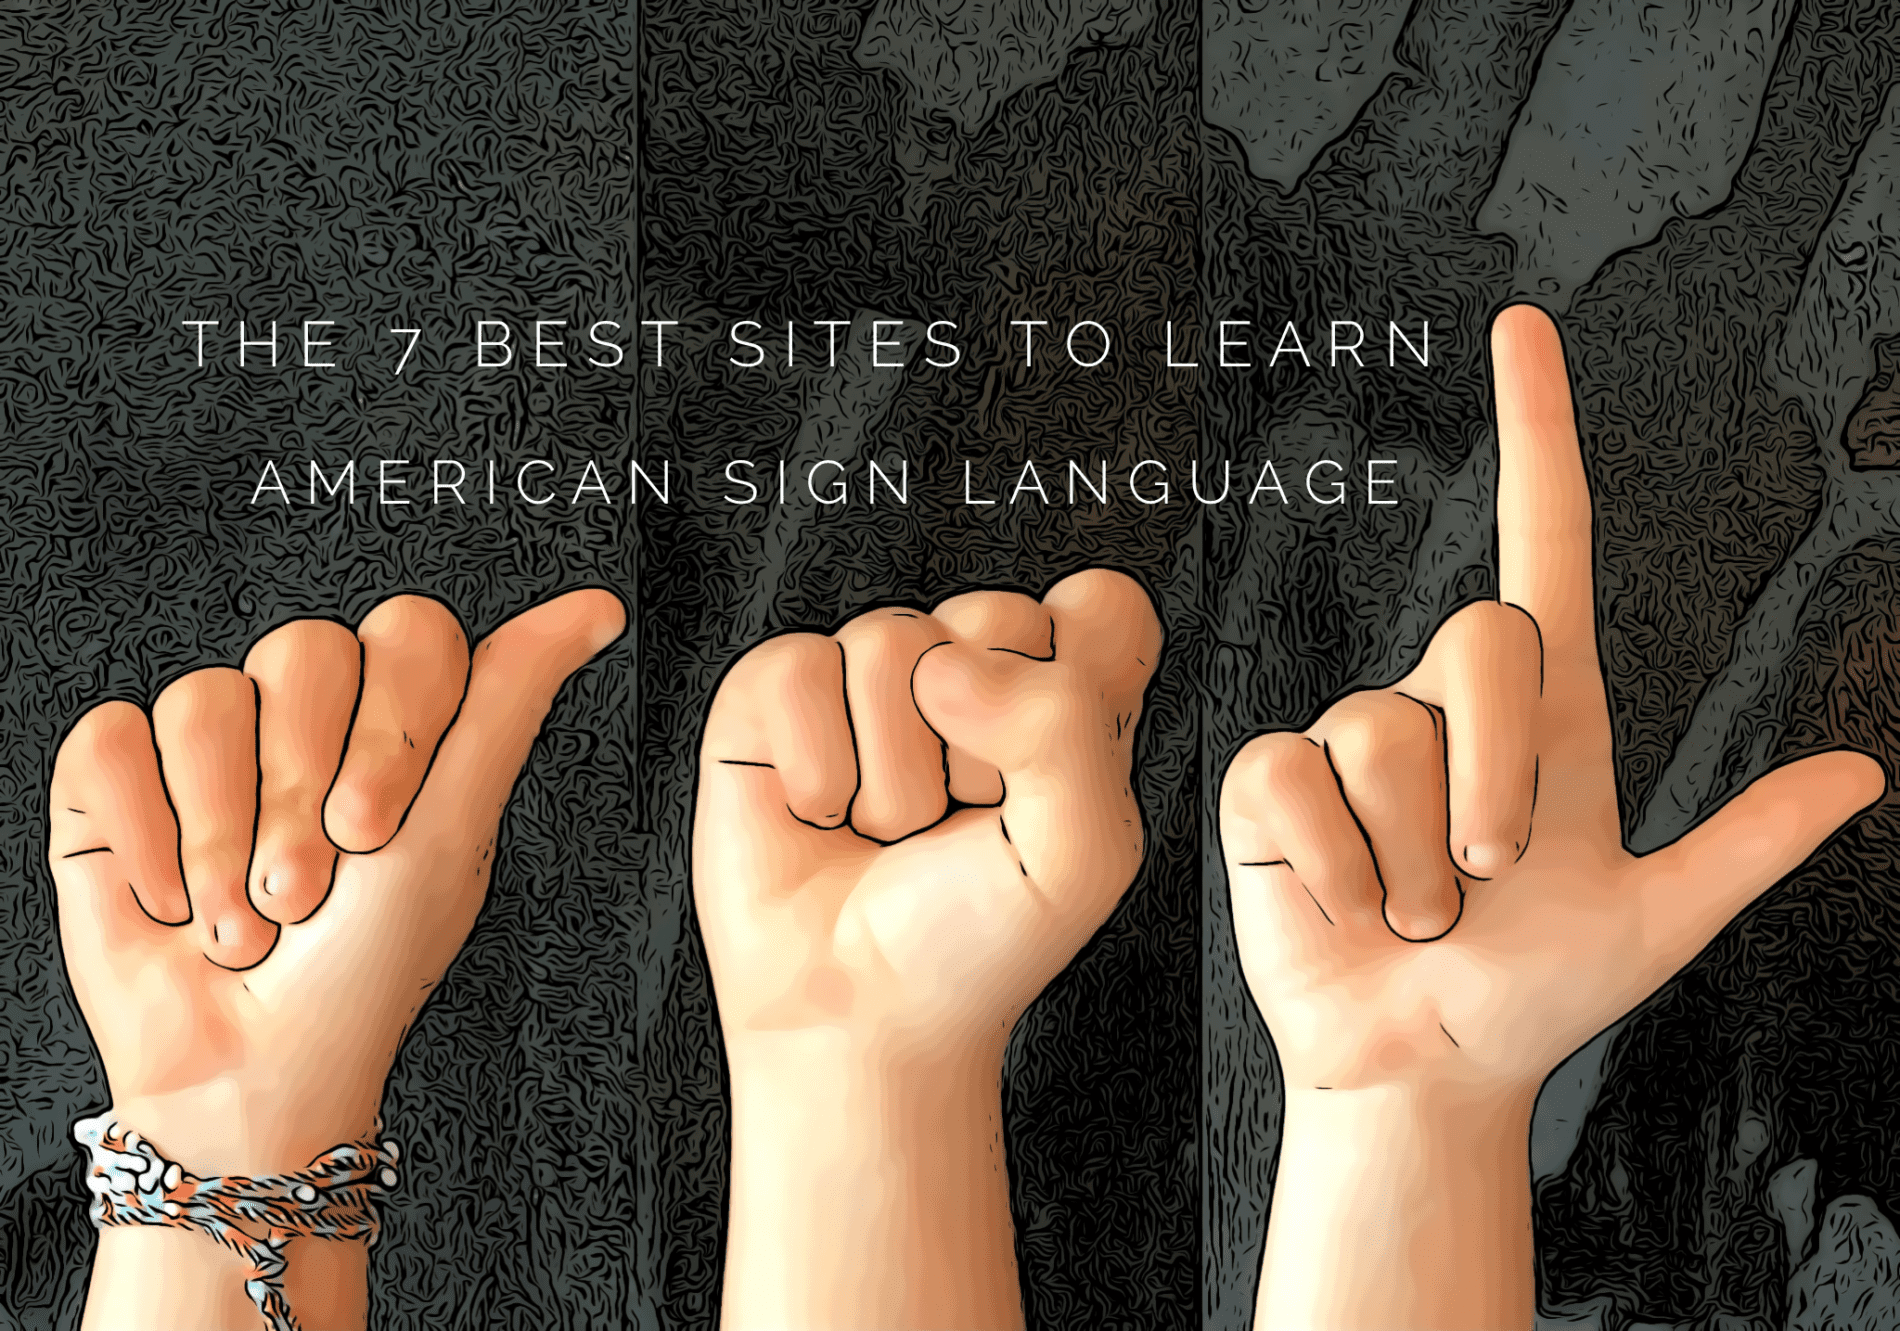 The best sites to learn ASL